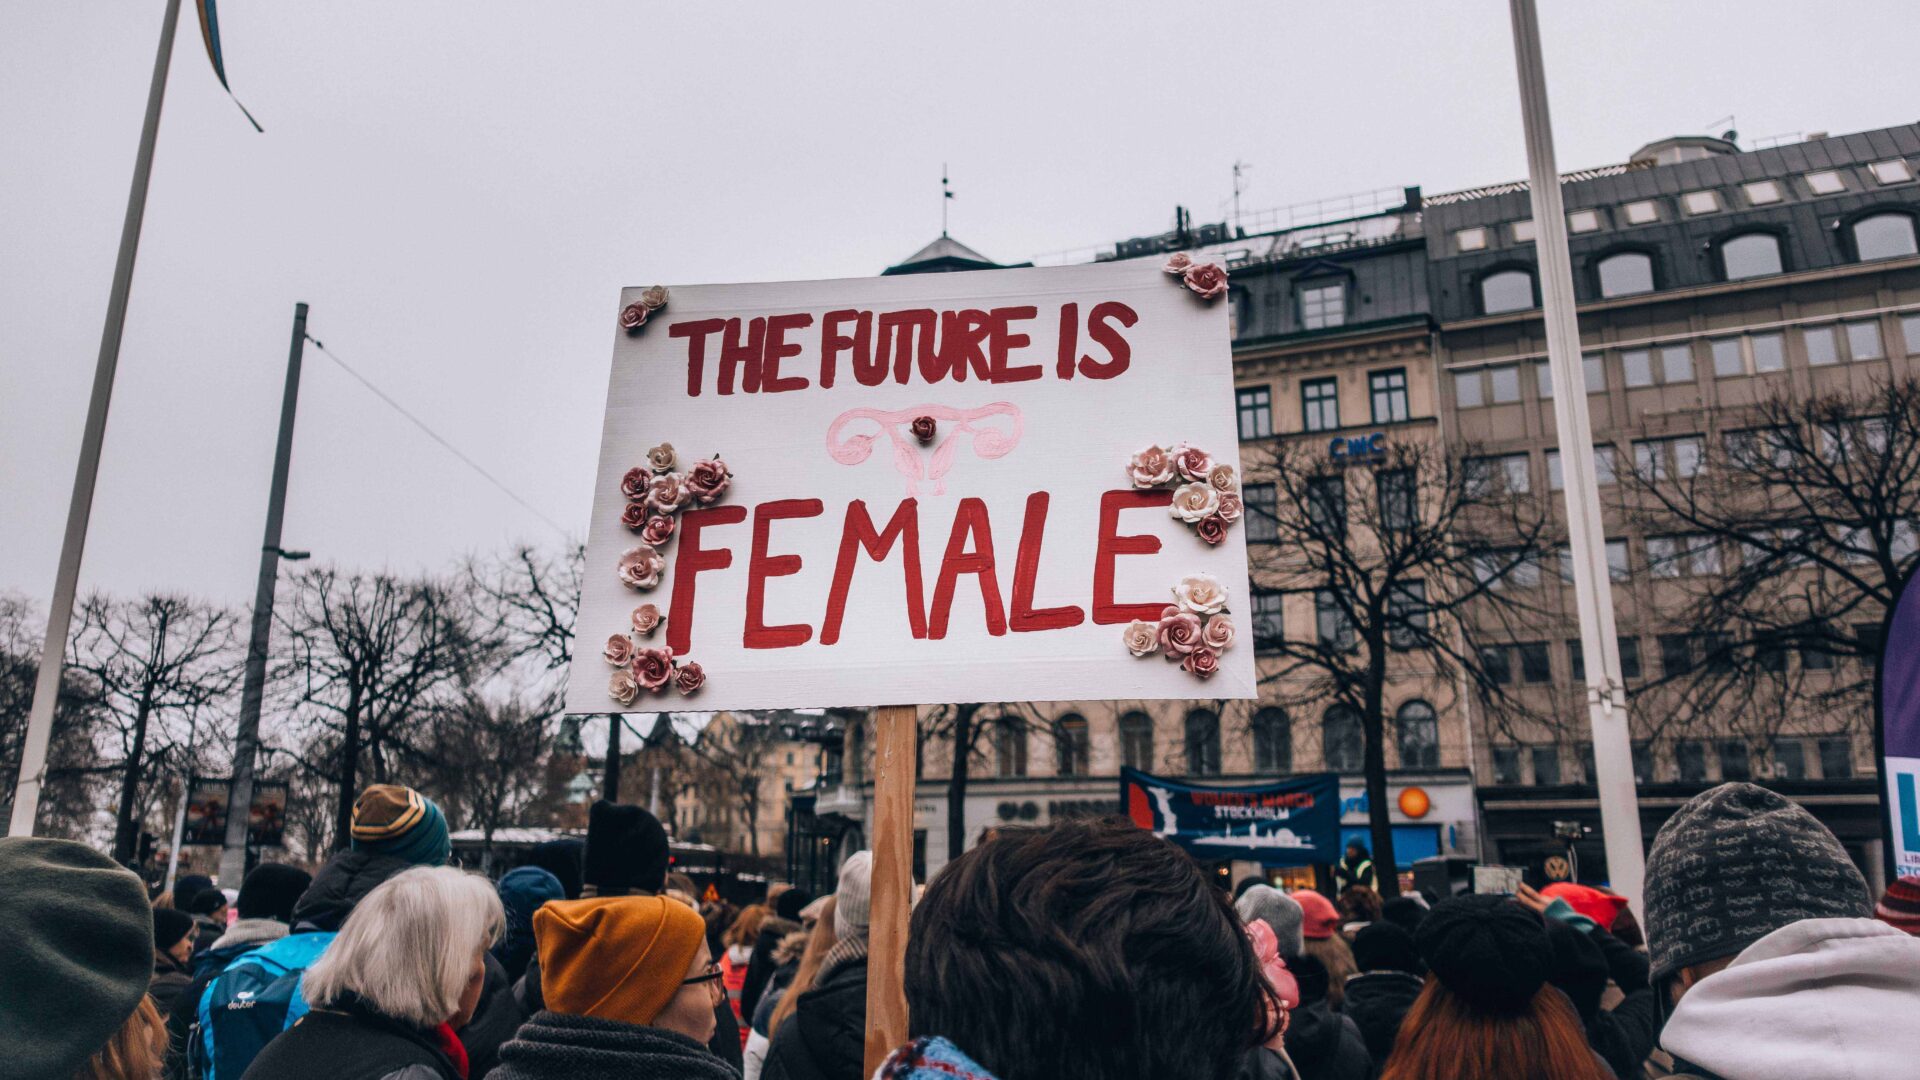 Lily Maxwell on… how to create more feminist cities